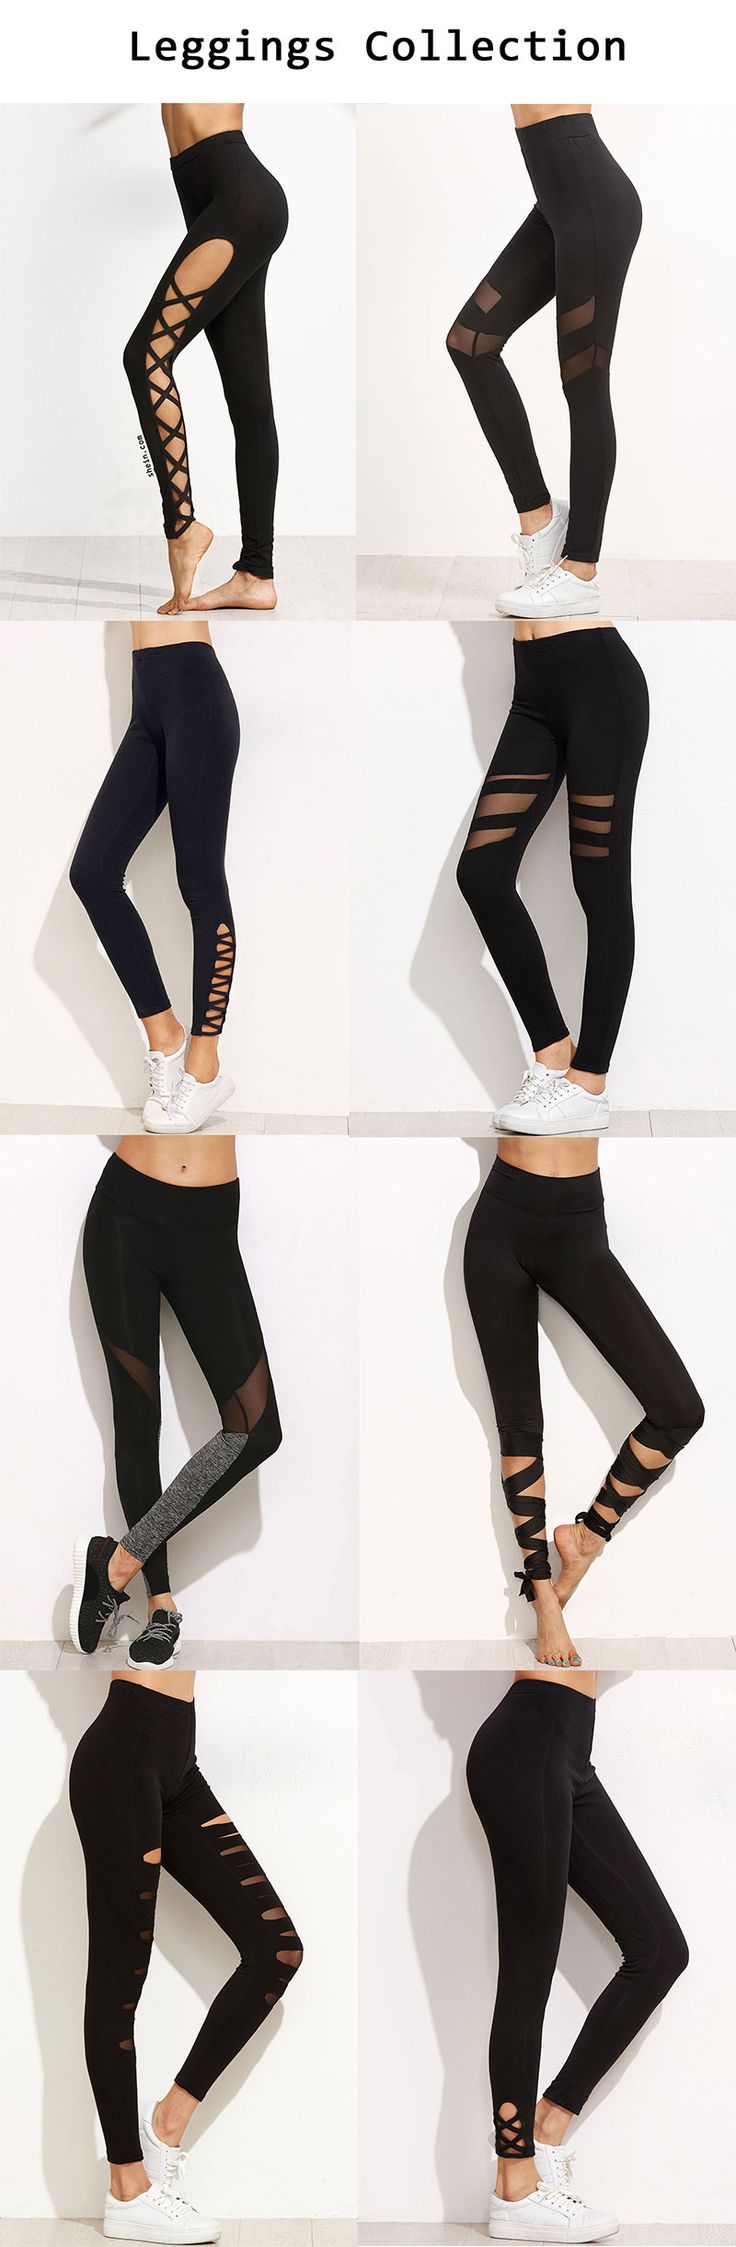 cute outfits with leggings athletic leggings collection for you. sign up for shein today and get $3 AQQZGRH